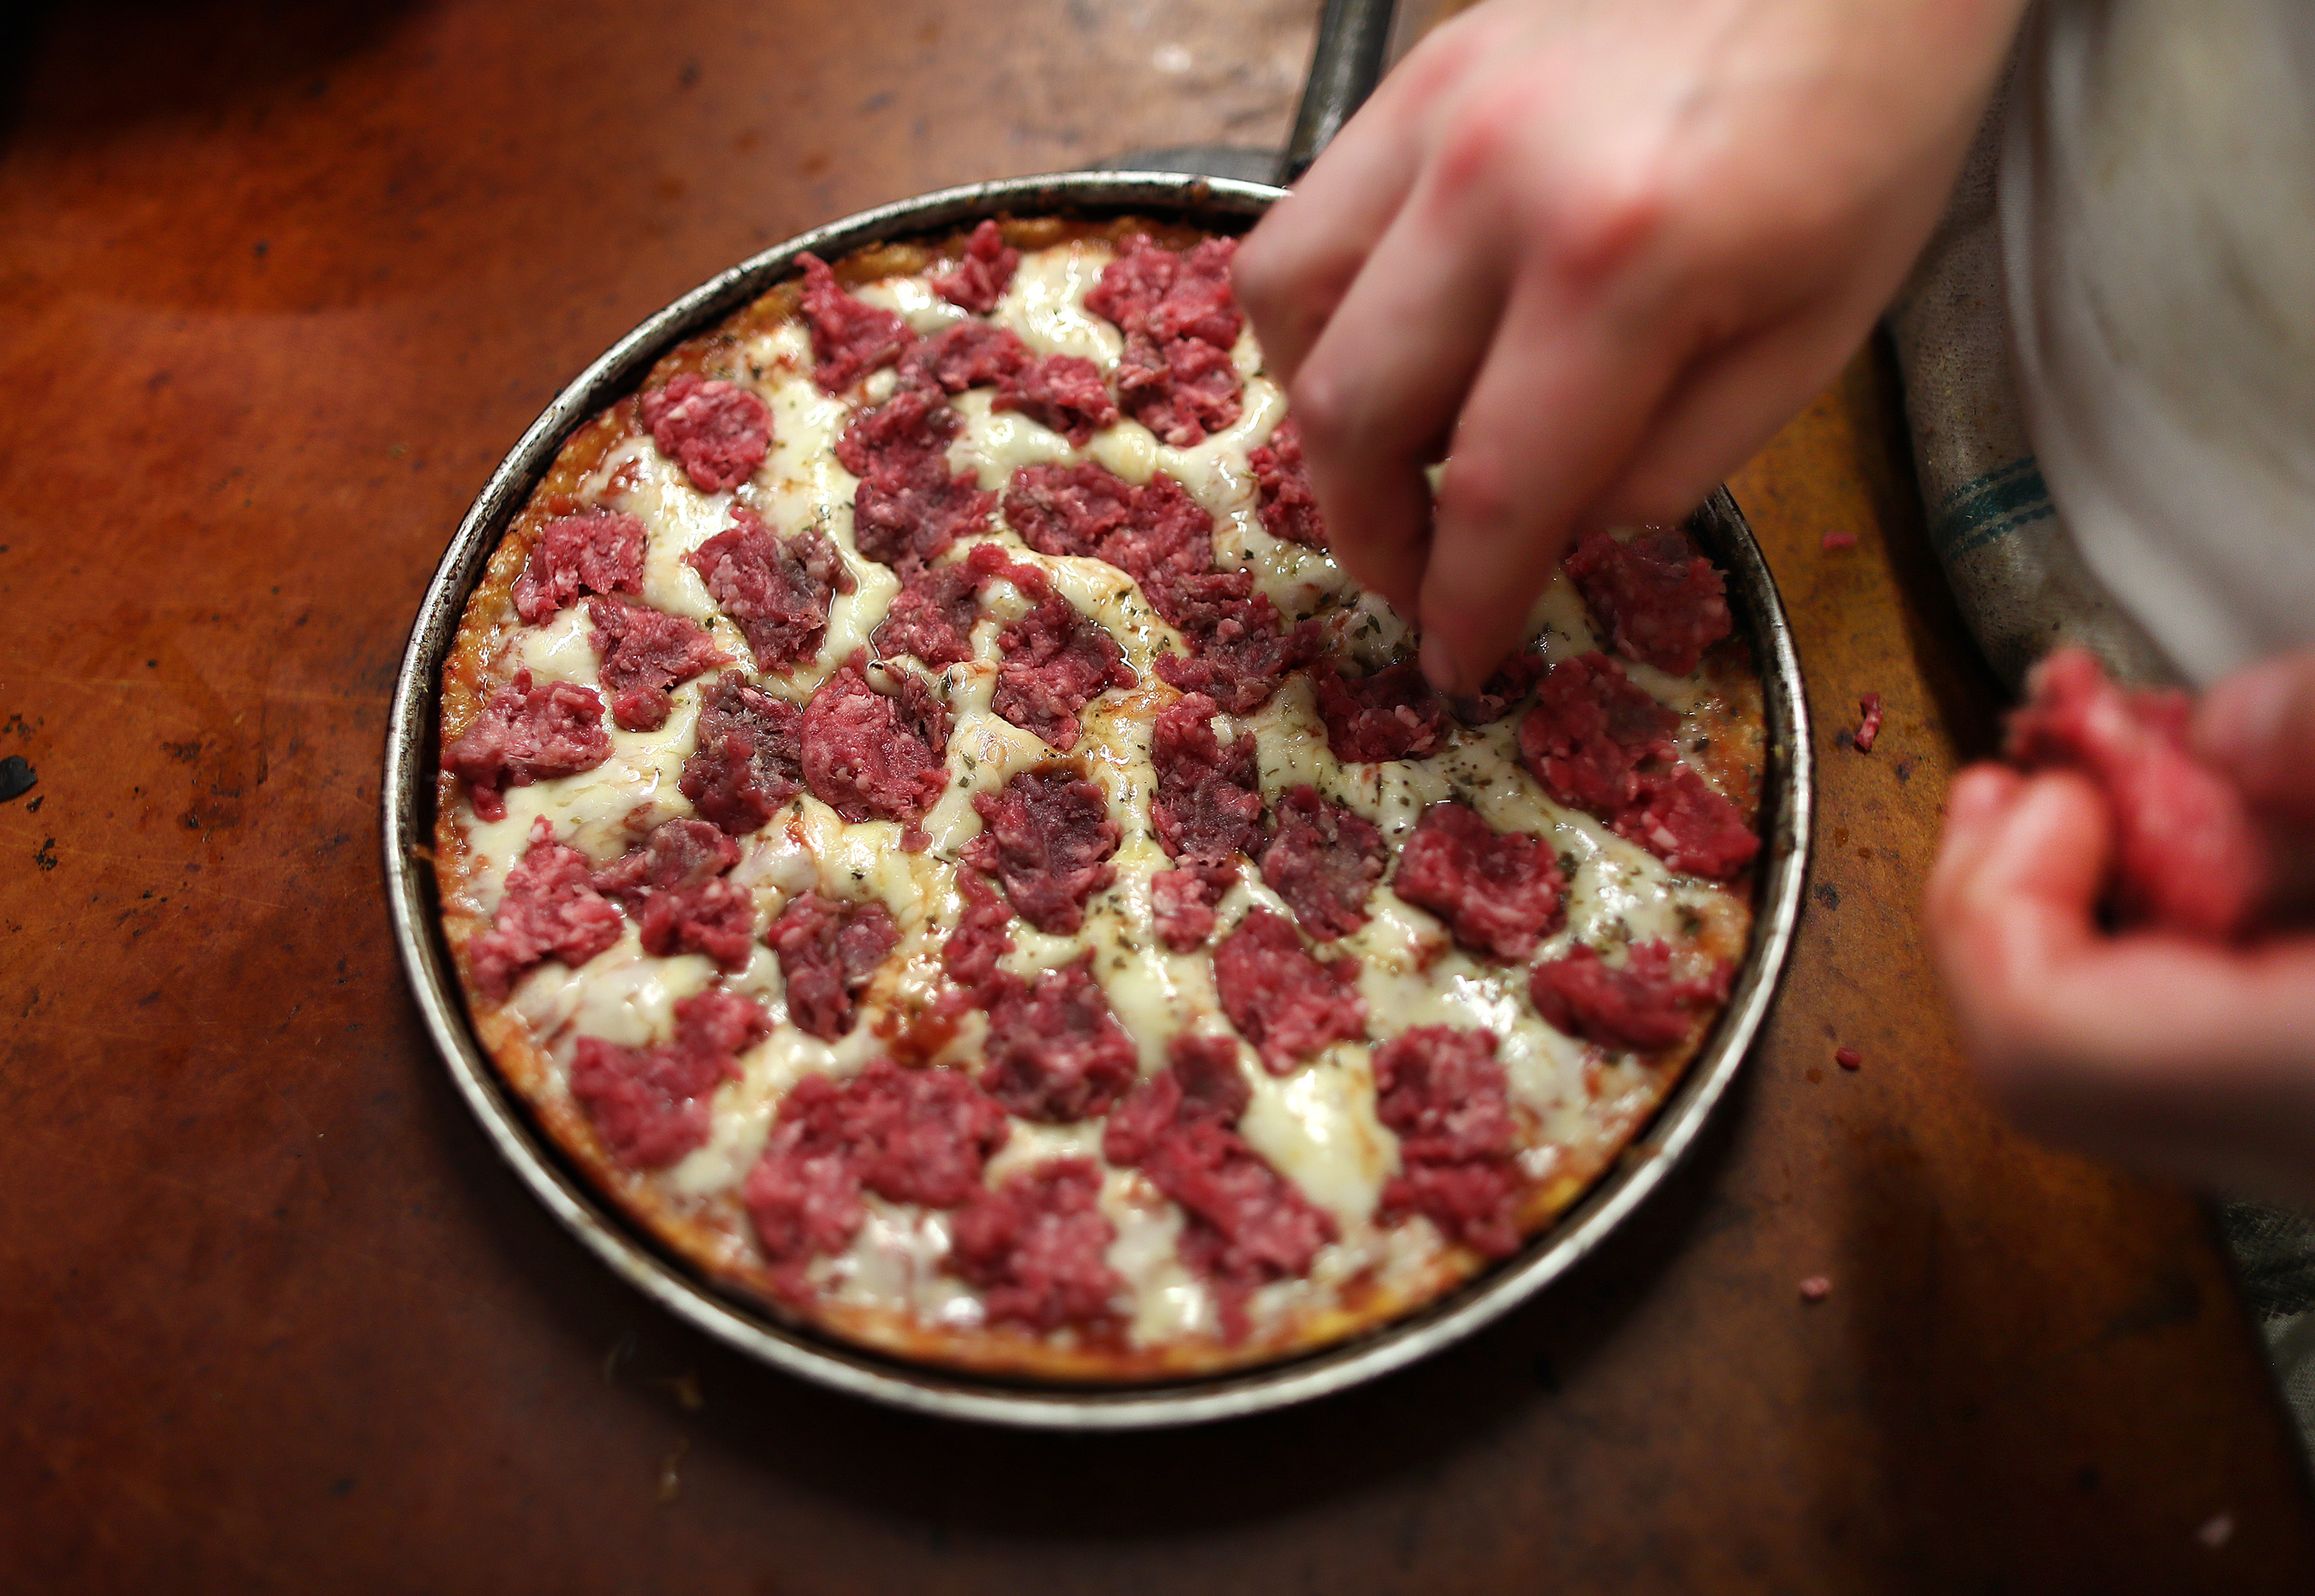 21 reasons why South Shore bar pizza is America's most delicious (and most  eccentric) pizza tradition » KJB Trending Hospitality